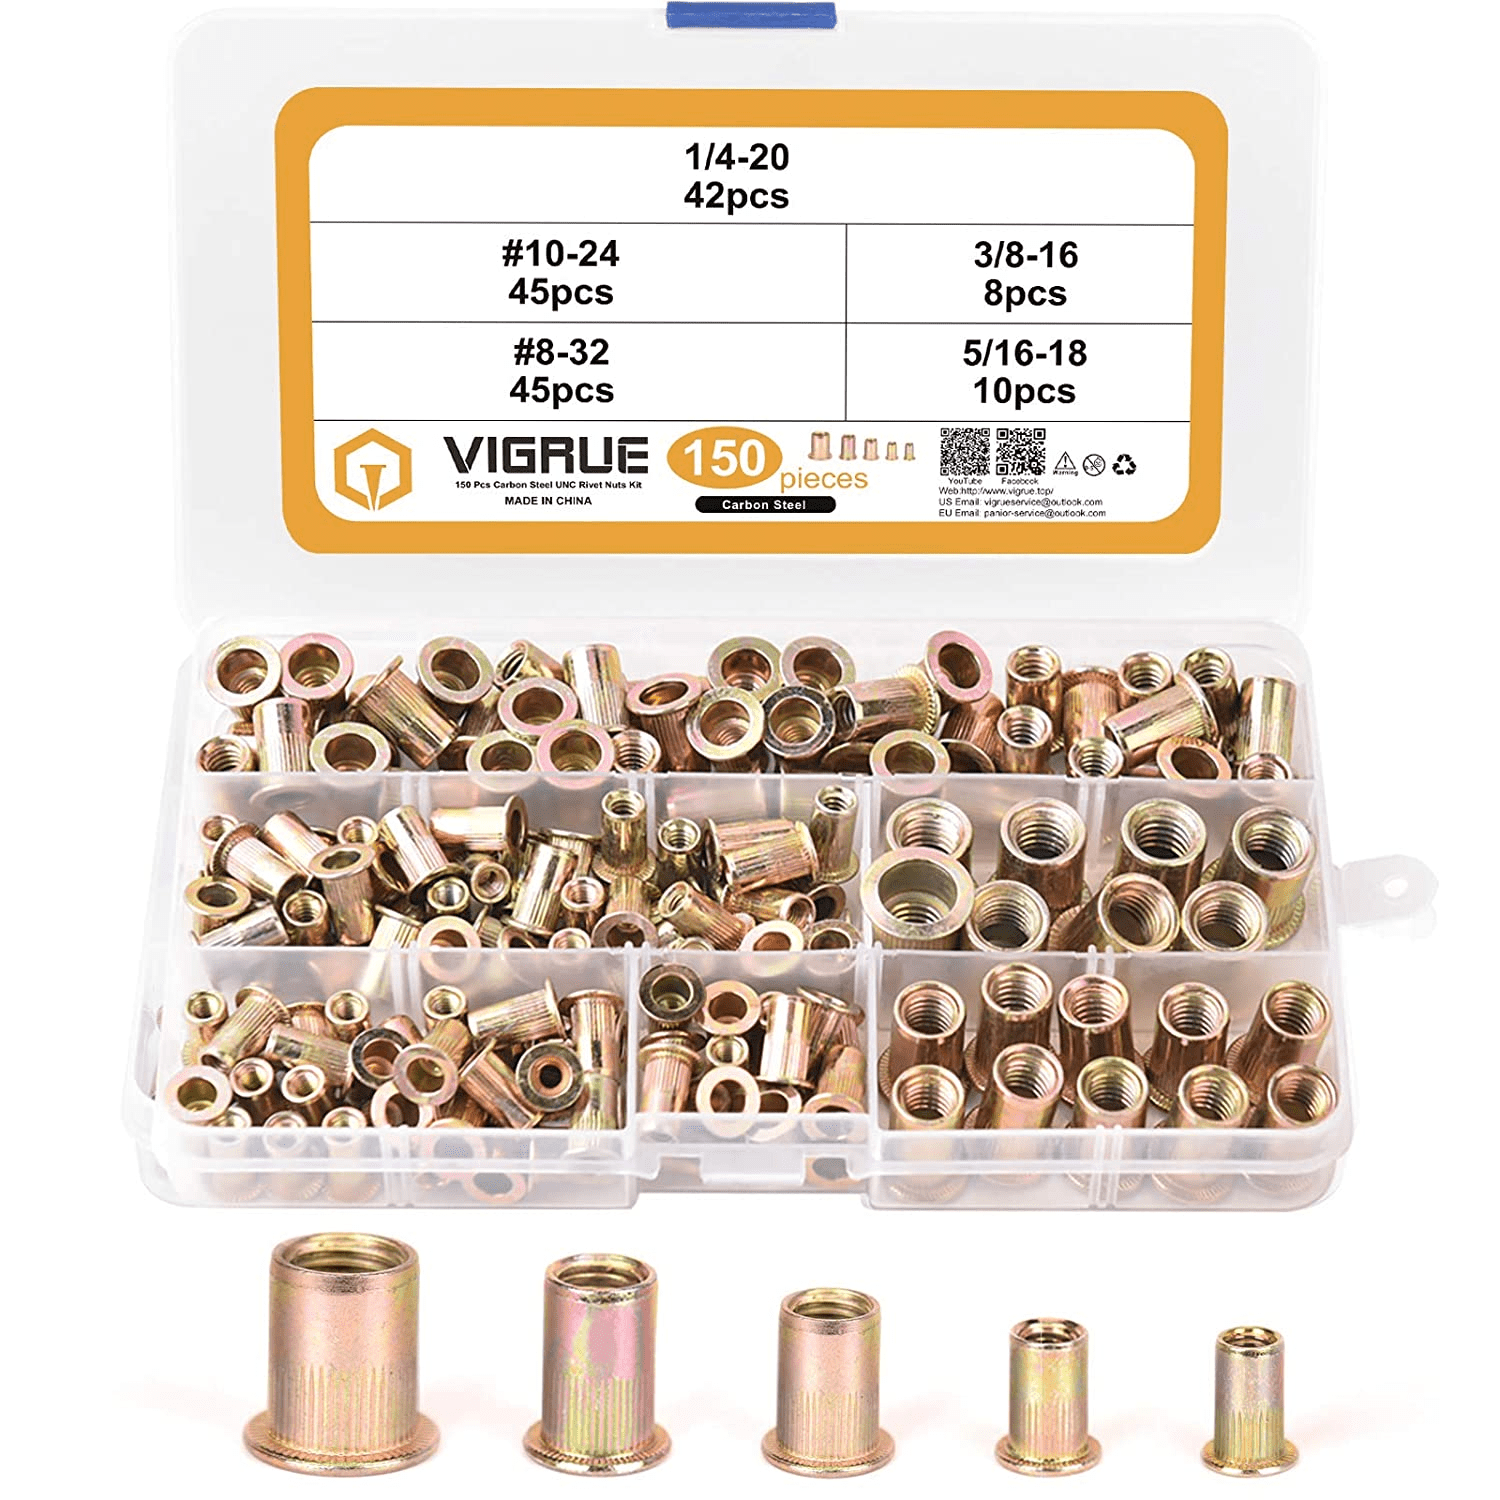 M3,4,5,6,8,10,12,14,16,18,20 mm  ZINC PLATED DOME NUTS FOR METRIC BOLTS 